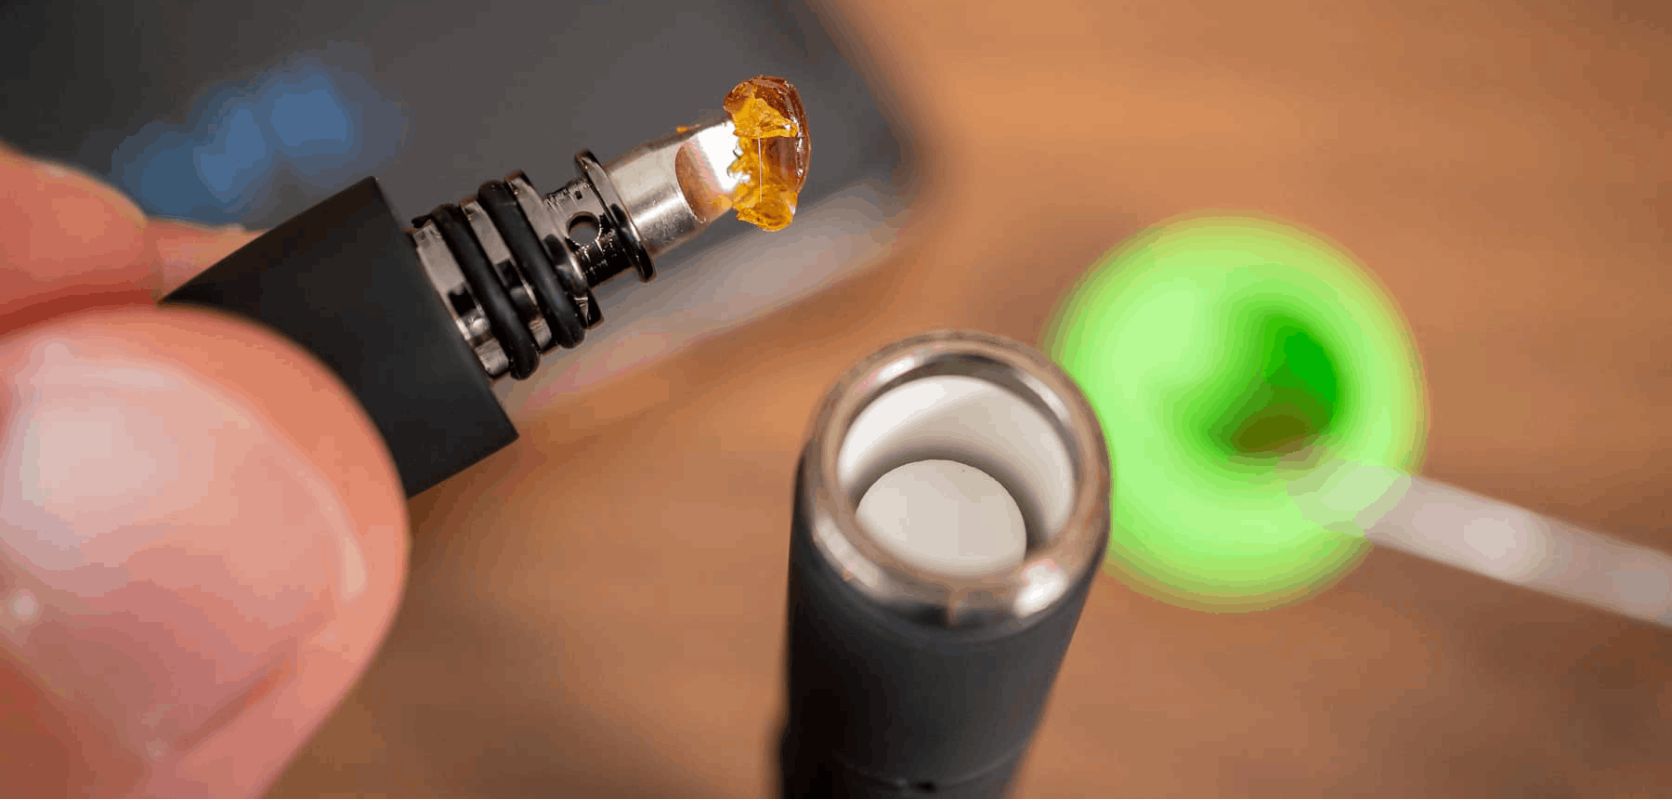 Choose a dab pen compatible with shatter and other concentrates. Consider battery life, adjustable temperature settings, and coil material (ceramic or quartz are preferable) for pure, flavorful vapor.